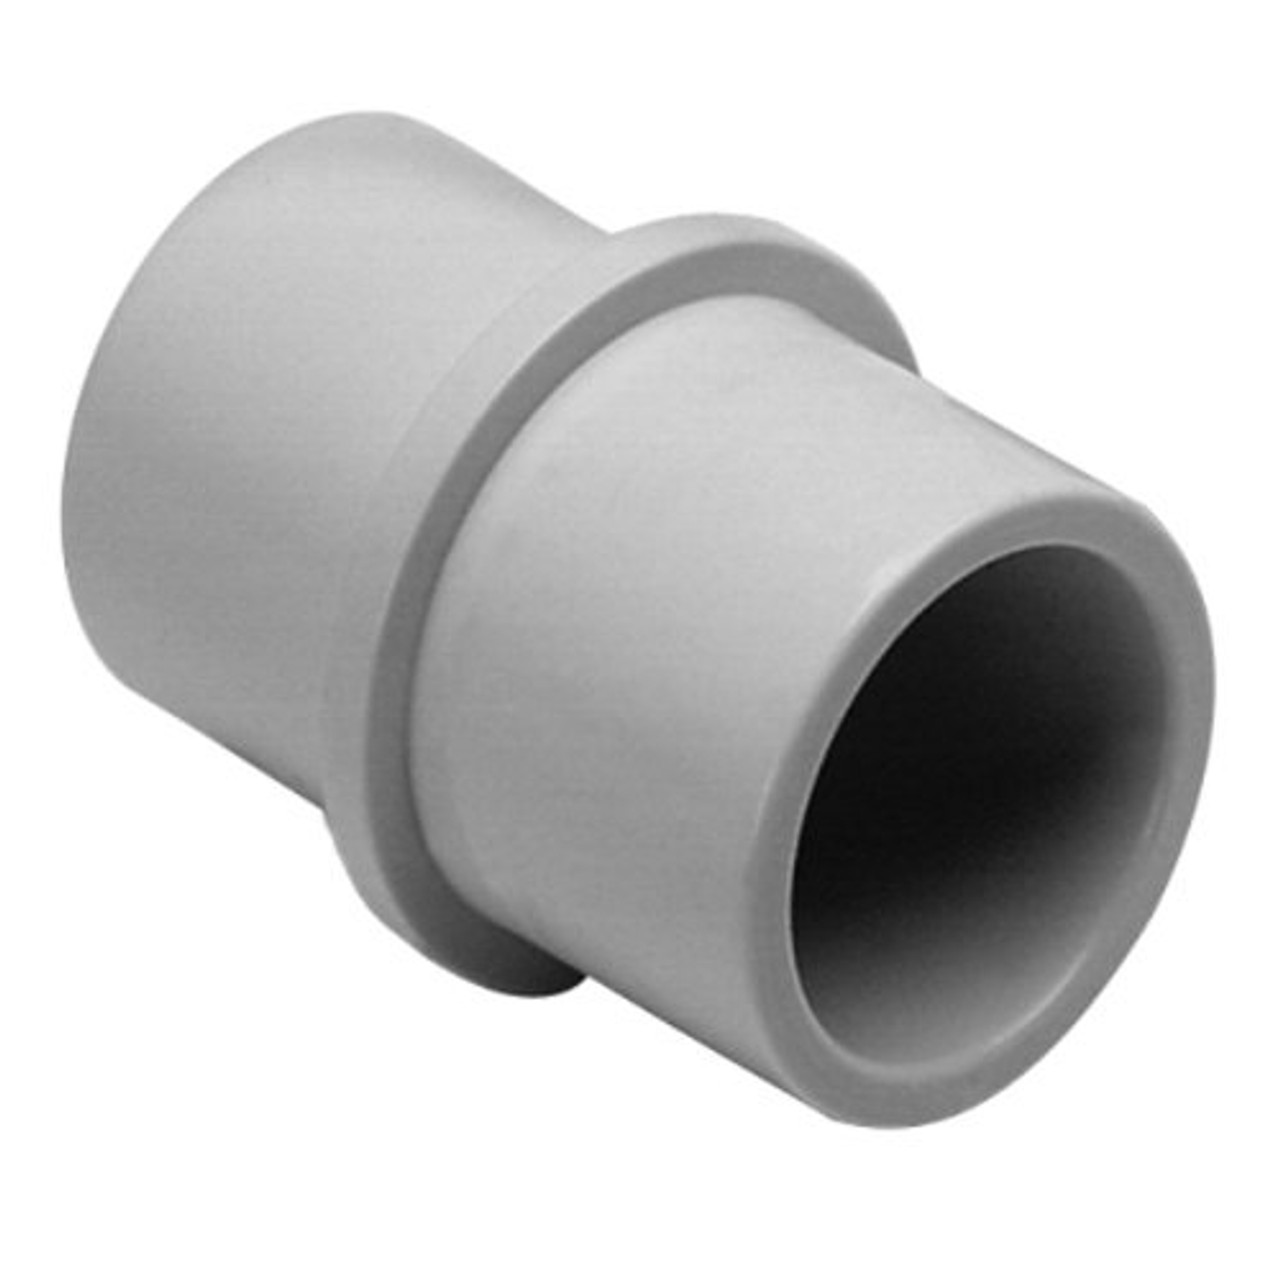 4" PVC Schedule 40 Internal Coupling - The Drainage Products Store 4 Schedule 40 Pvc Pipe Inside Connector